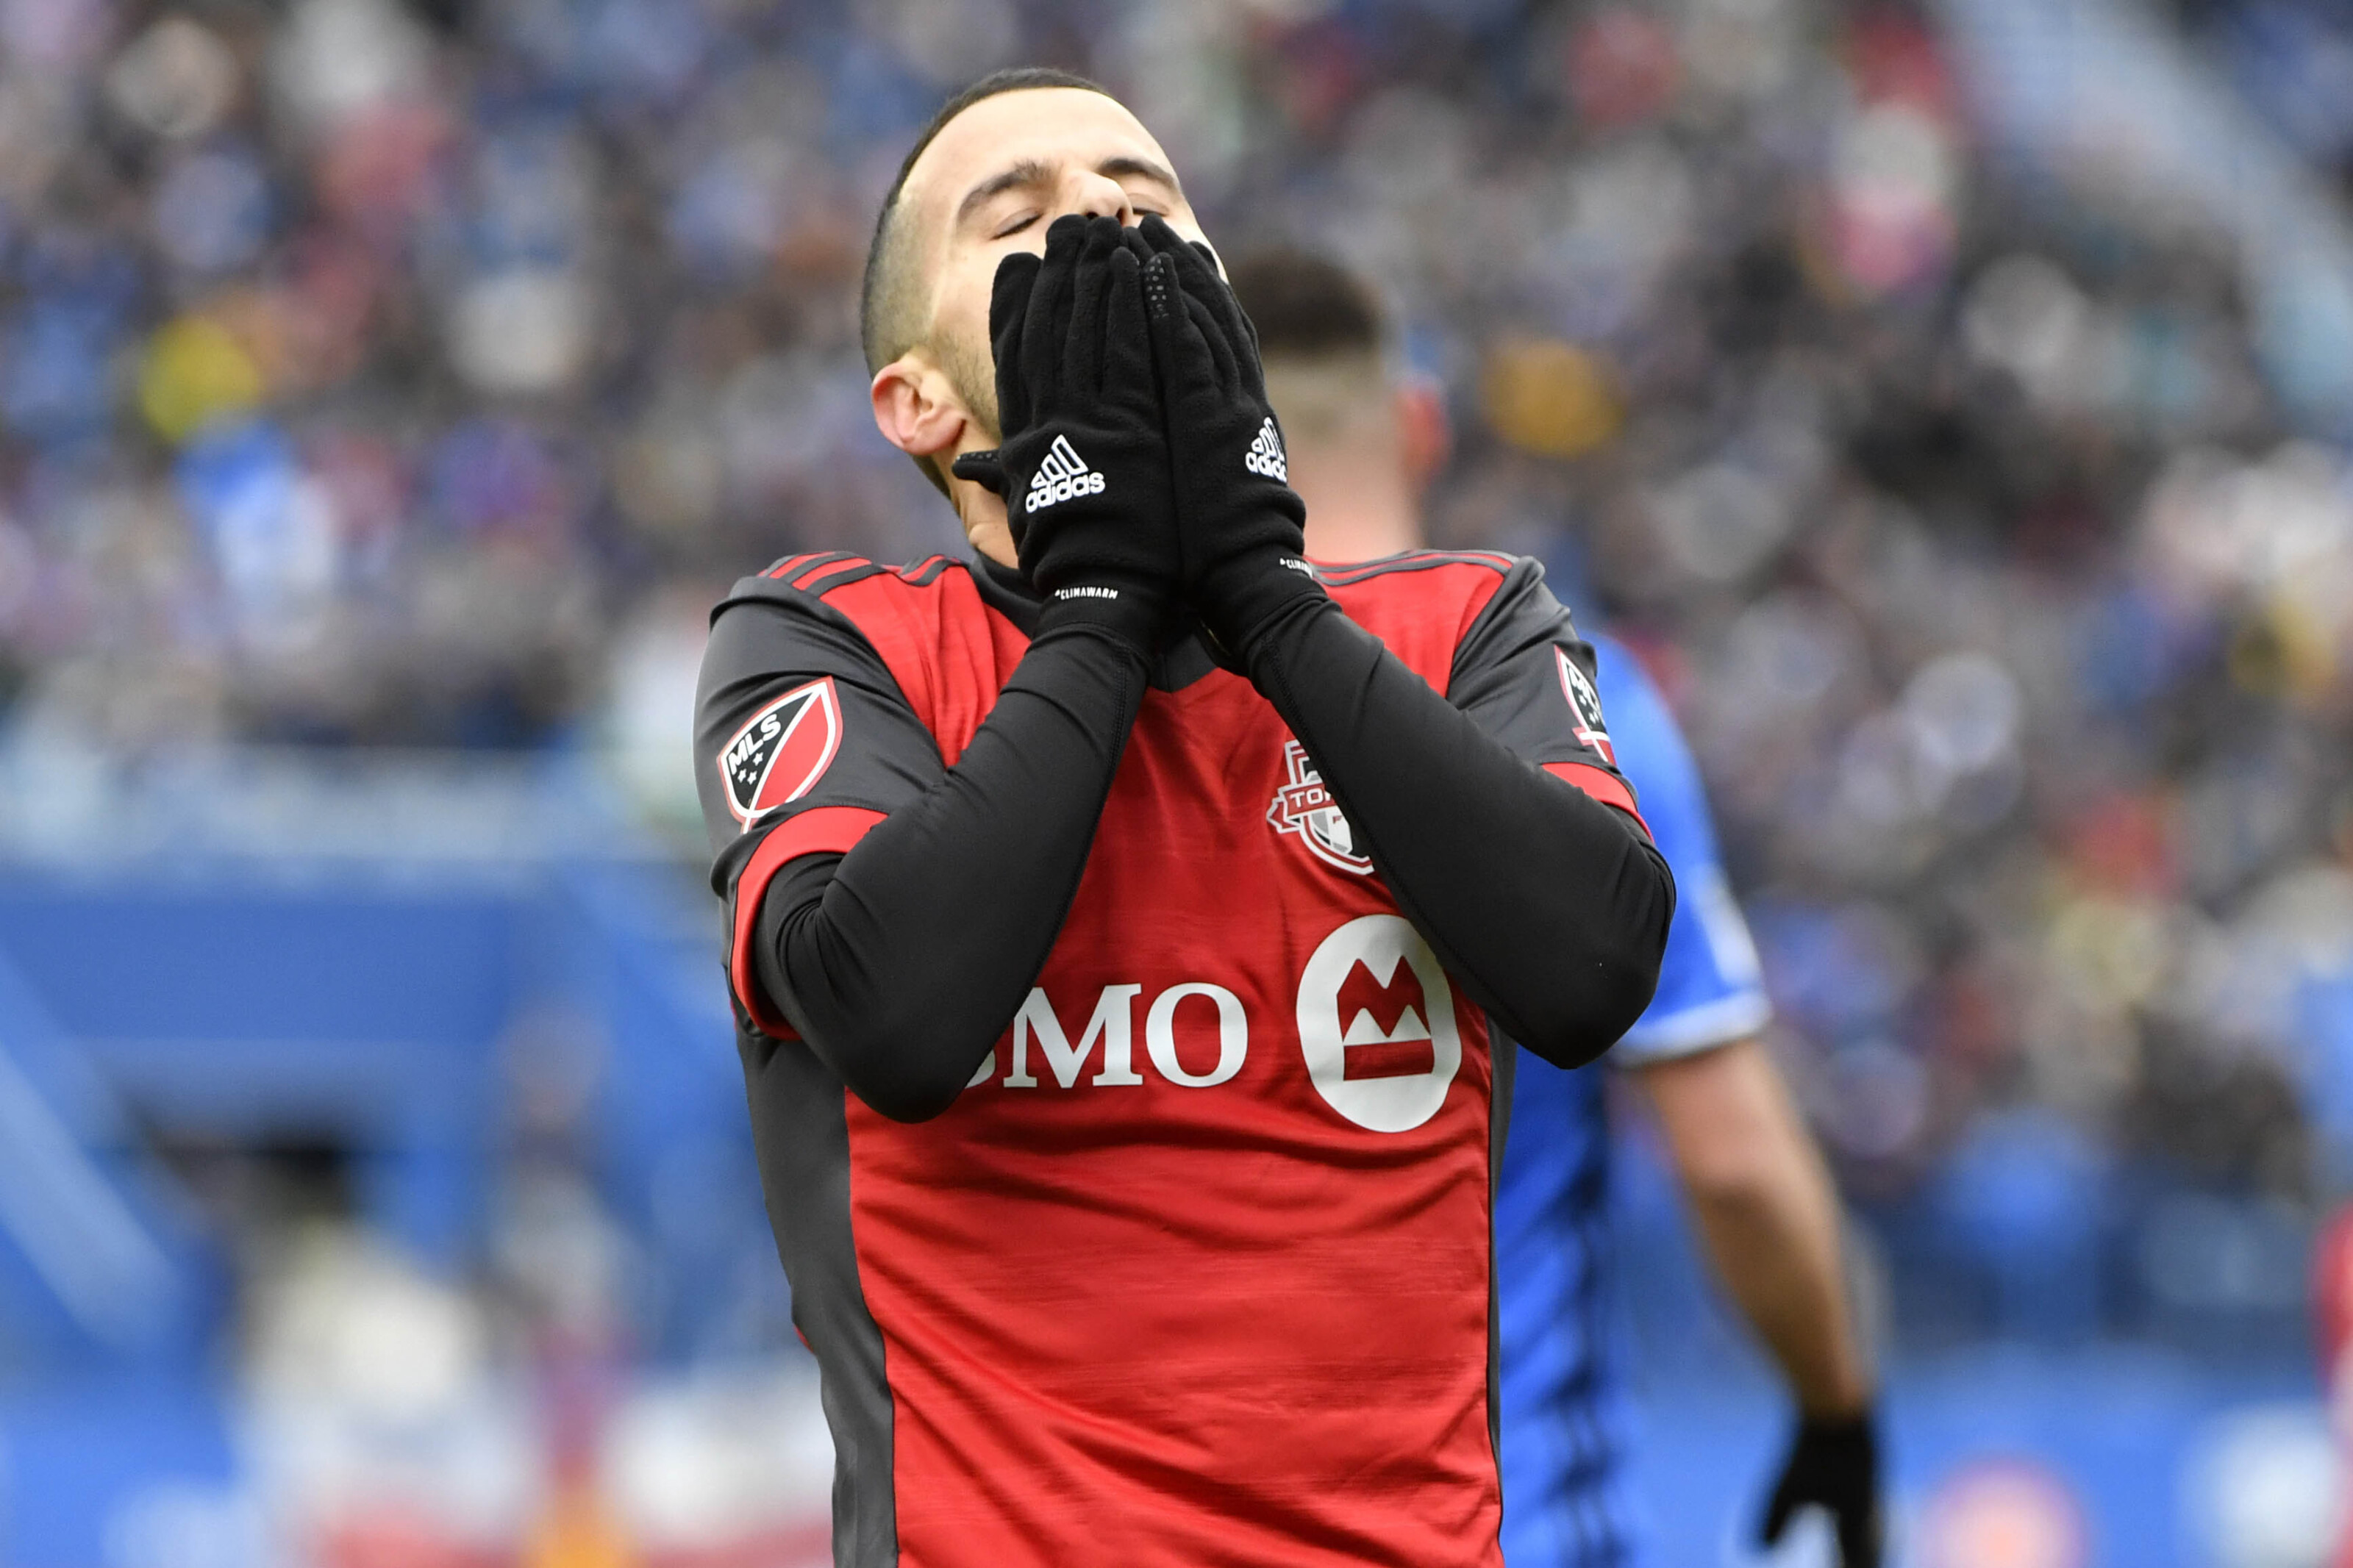 Giovinco signs with Italy's Sampdoria, Toronto FC makes deal with Red Bulls  - Coast Reporter